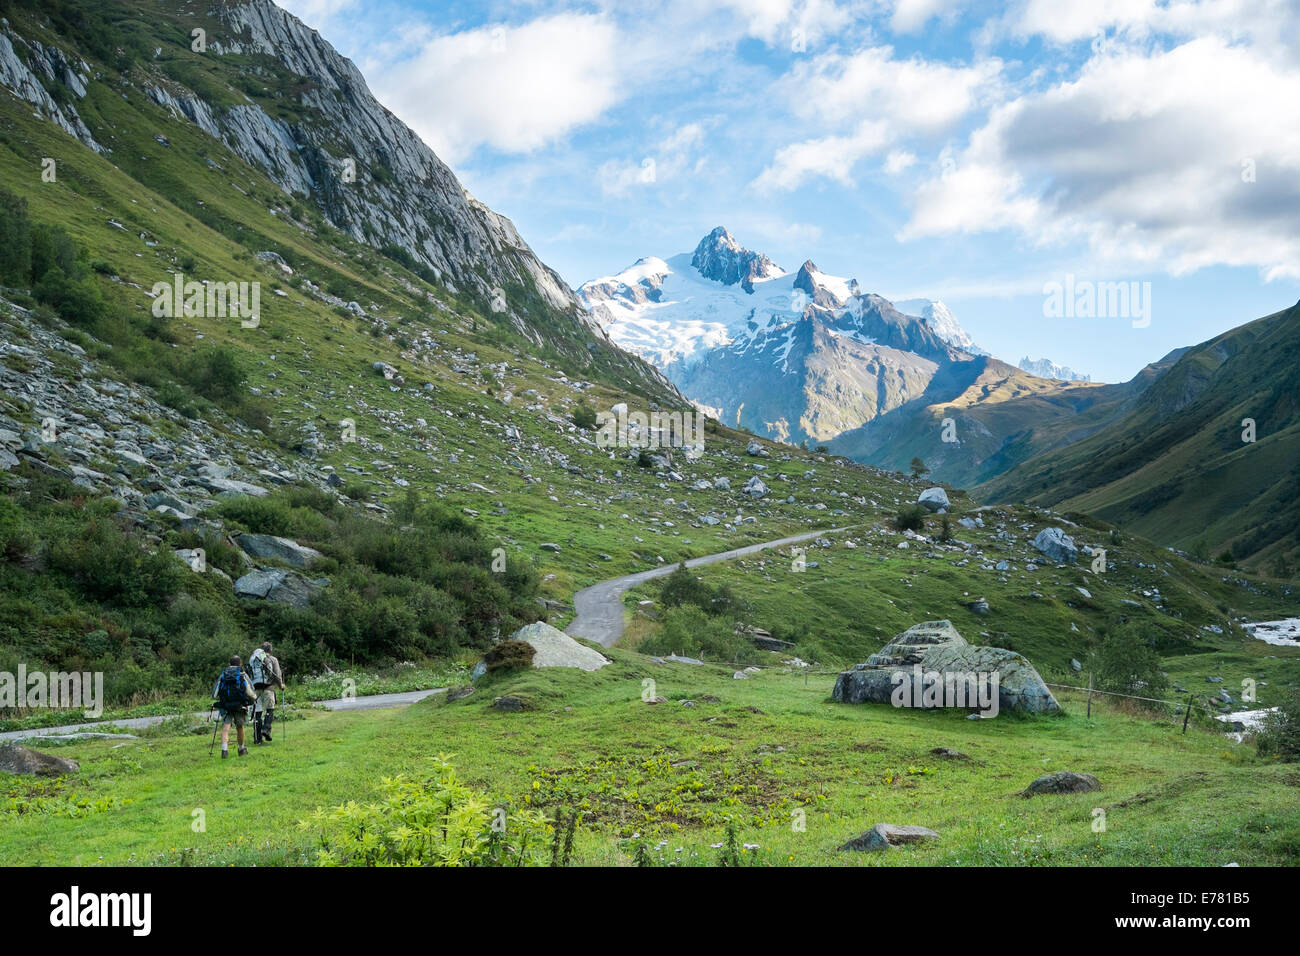 LES CHAPIEUX, FRANCE - AUGUST 27: Hikers walking with Glacier Needles in the background. The region is a stage at the Mont Blanc Stock Photo